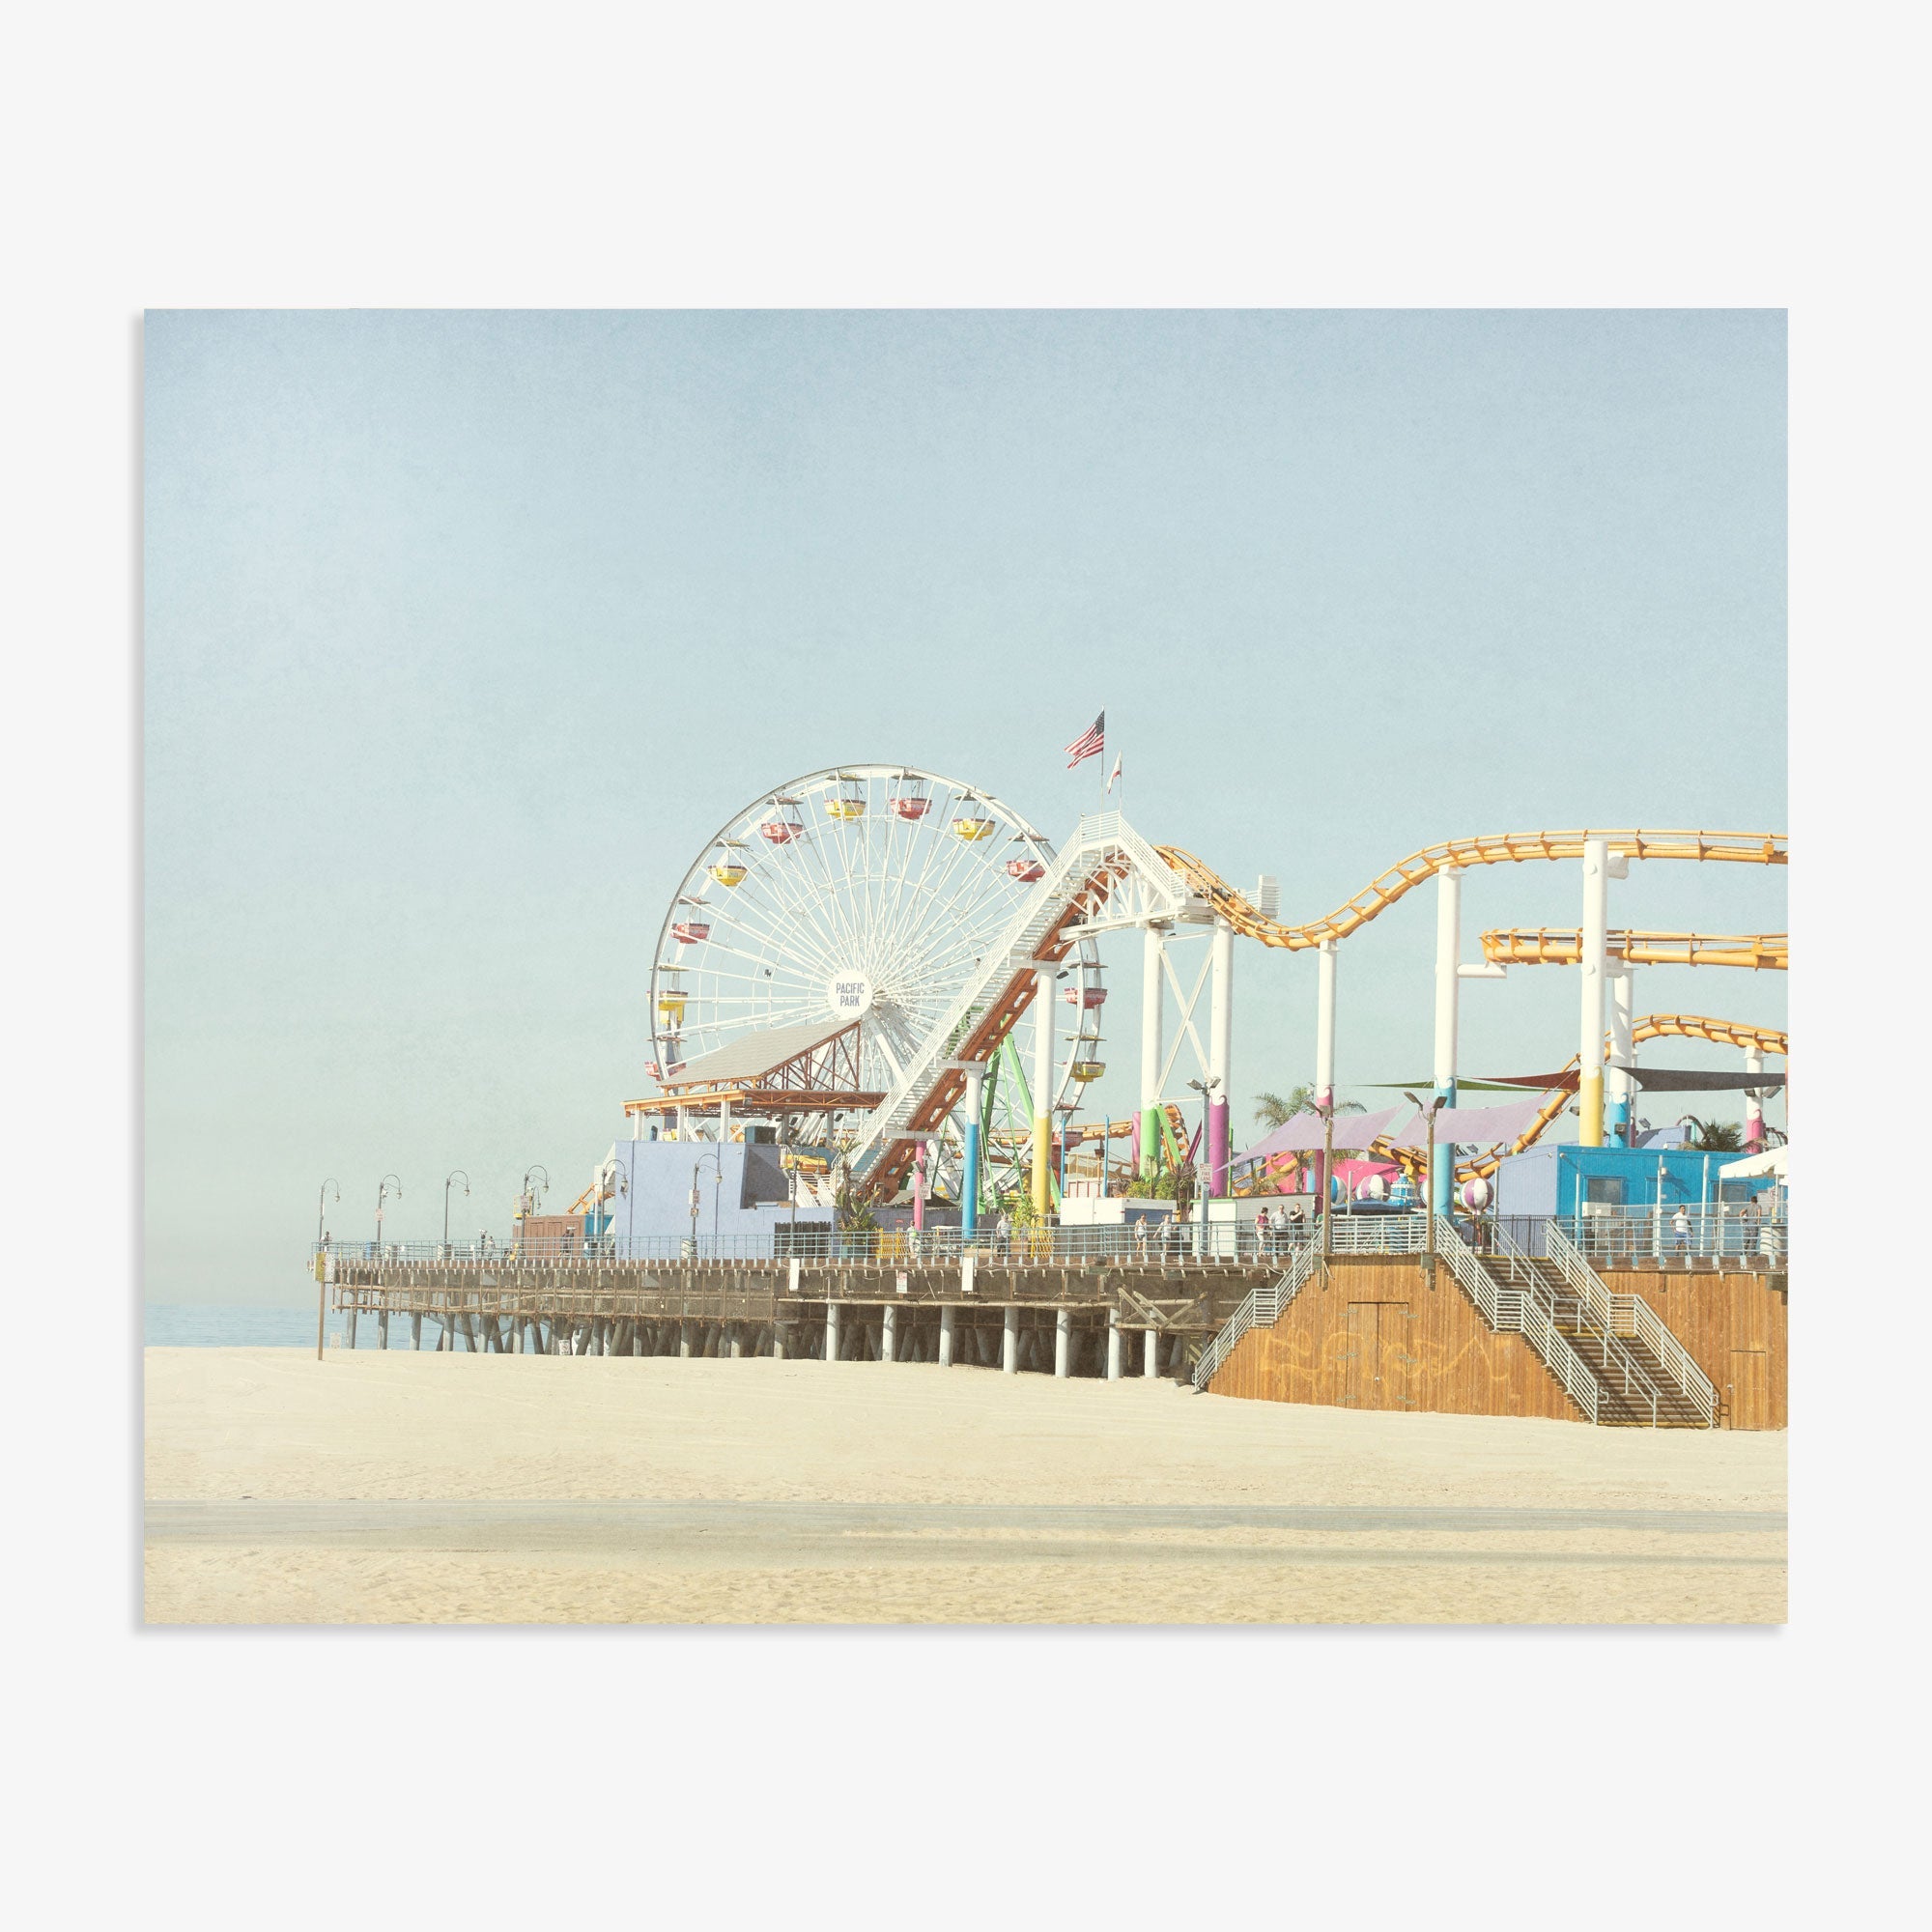 A seaside amusement park featuring a ferris wheel and roller coaster on the Santa Monica Pier, set against a clear sky. The sandy beach in the foreground is empty and expansive. Offley Green&#39;s California Print, &#39;Santa Monica Pier&#39;.